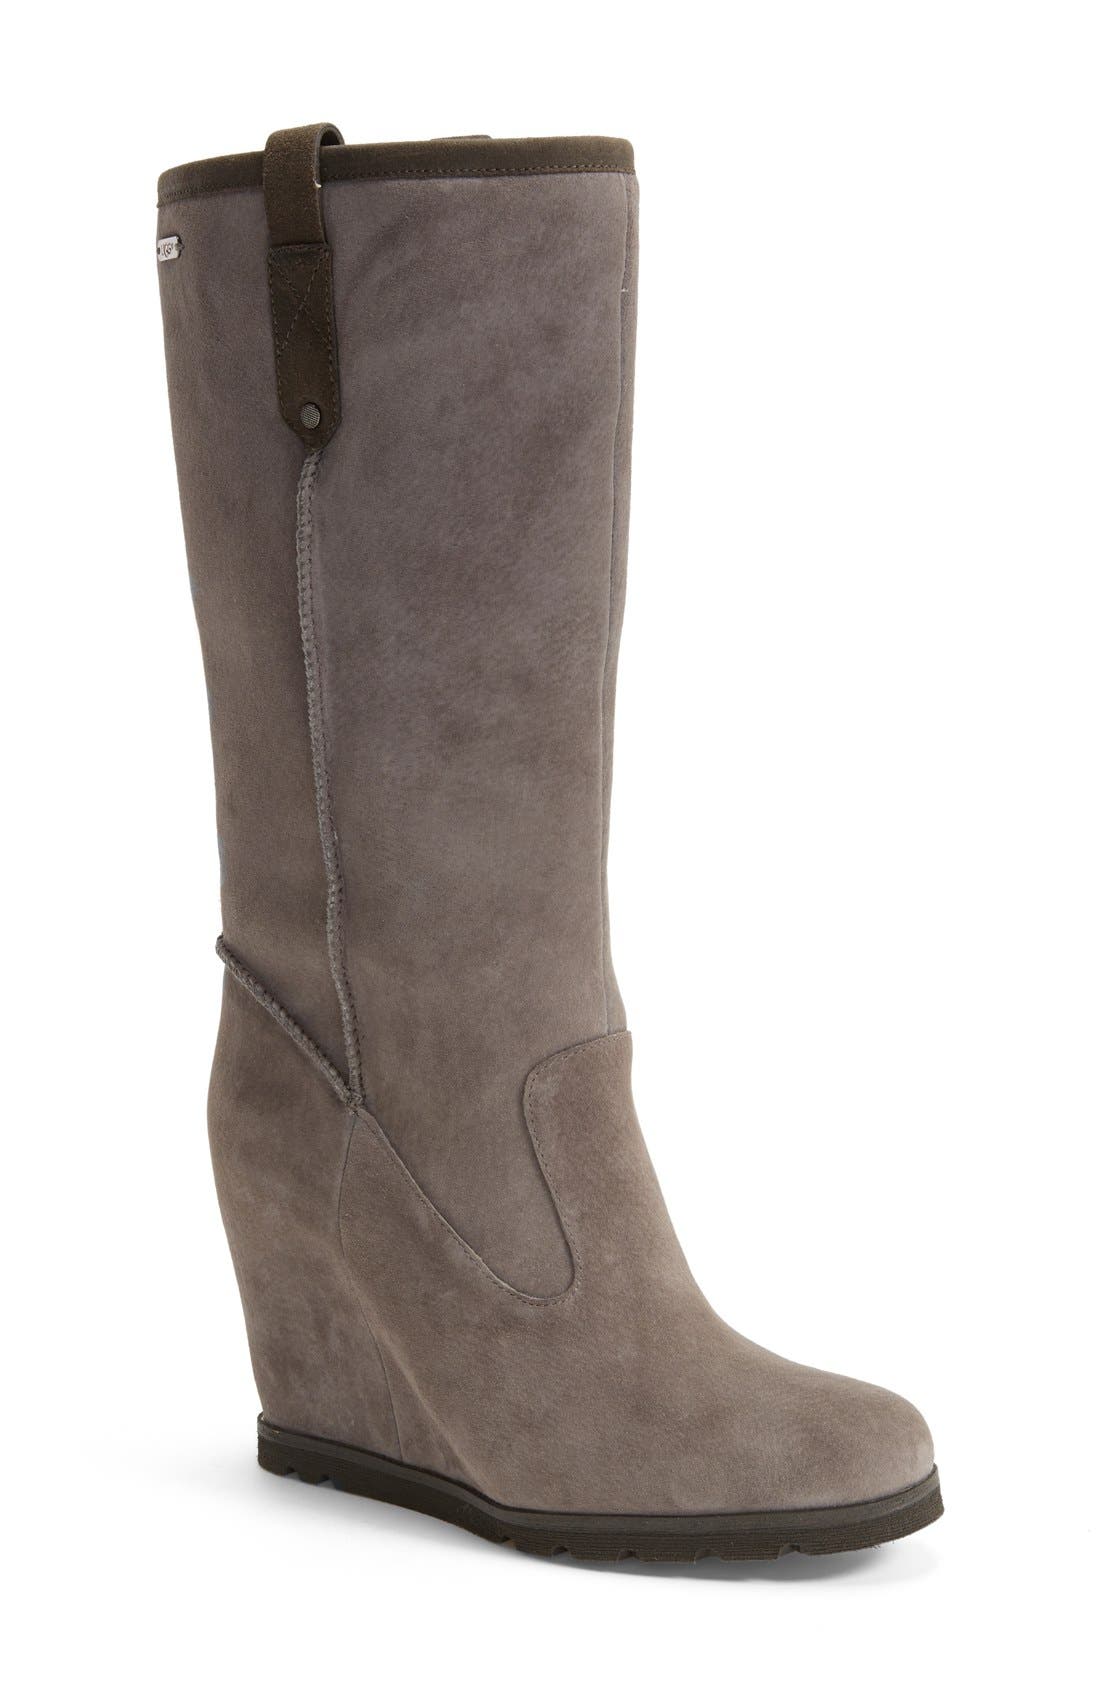 ugg soleil wedge boots